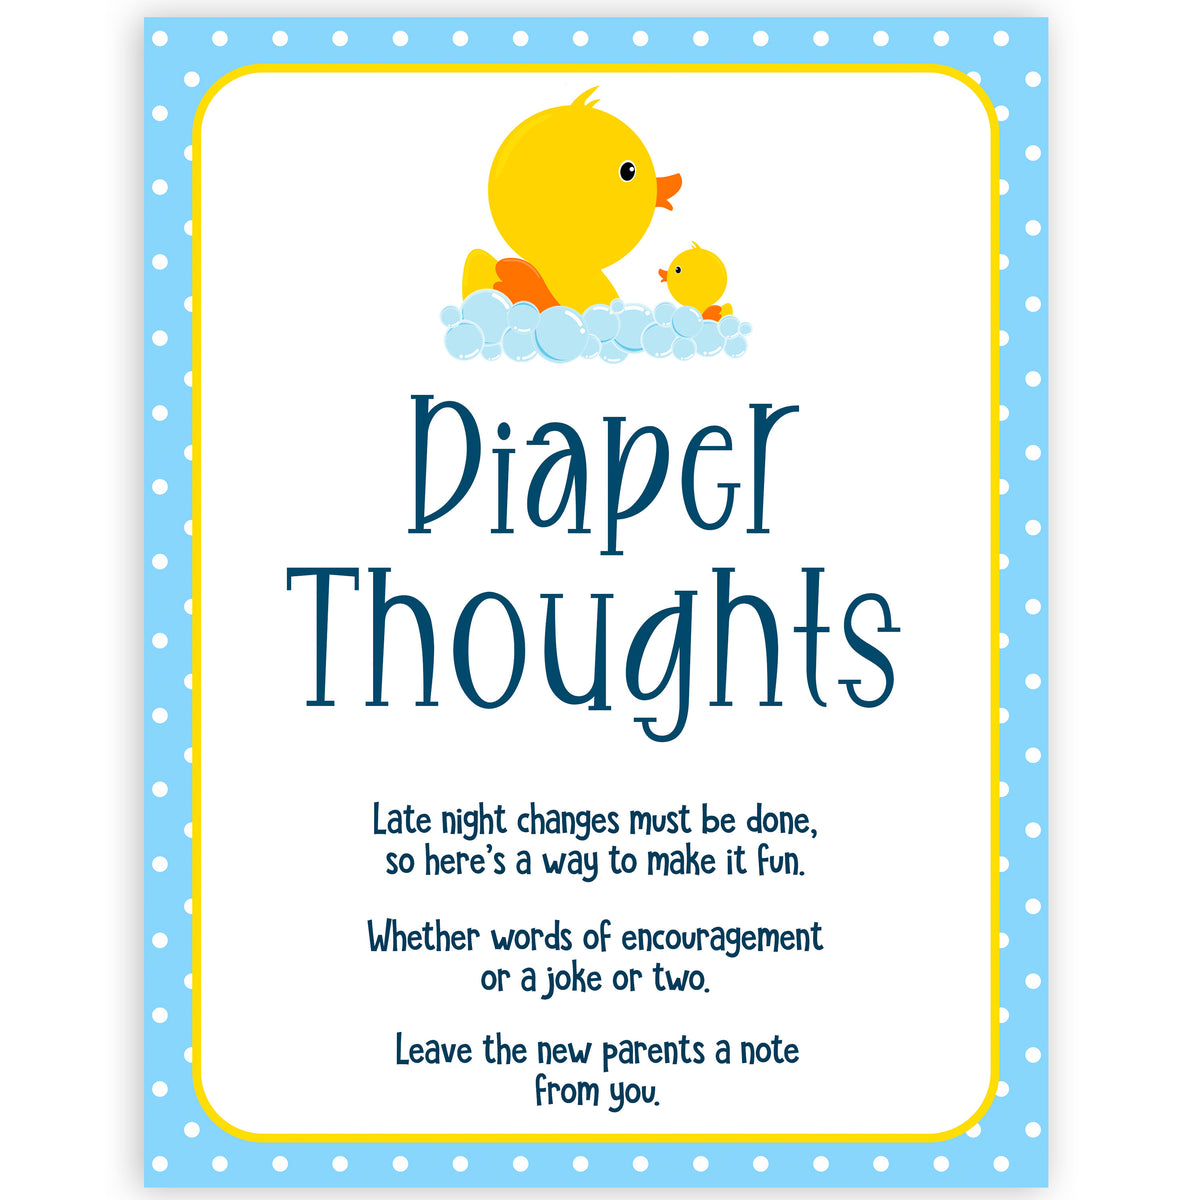 diaper-thoughts-rubber-ducky-printable-baby-shower-games